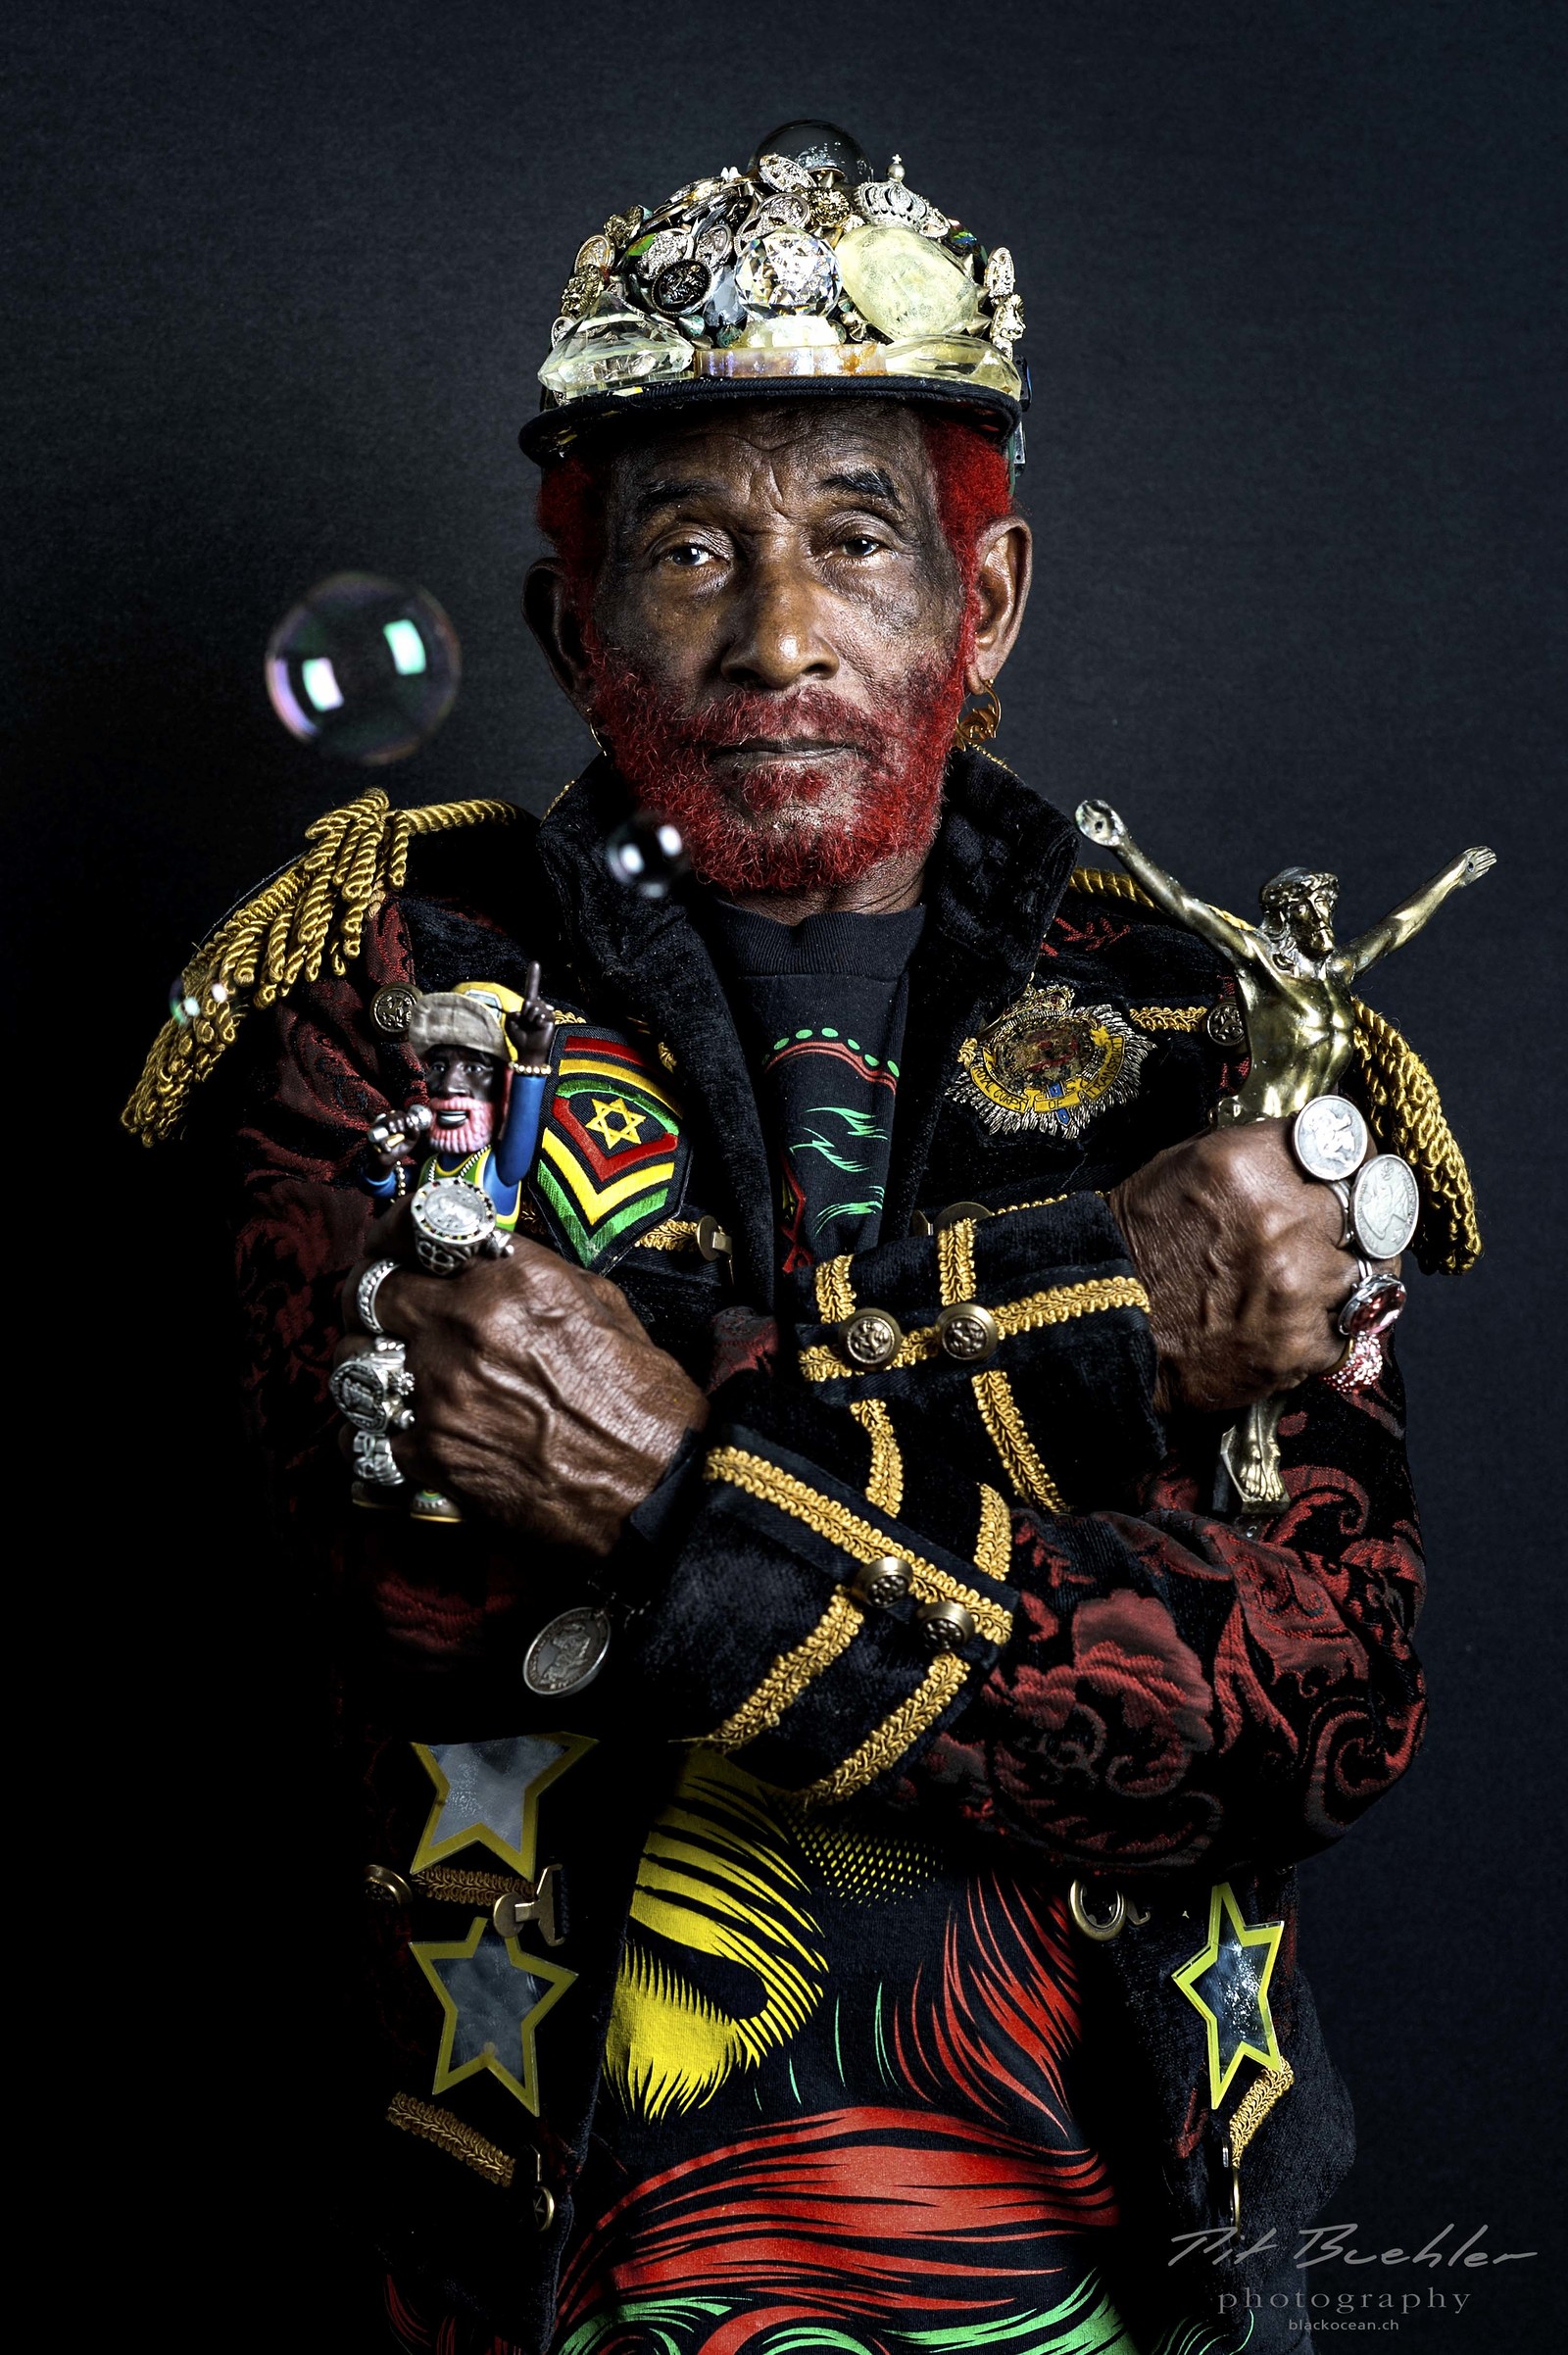 LEE 'Scratch' PERRY tickets, Fiddlers - buy from Headfirst ...